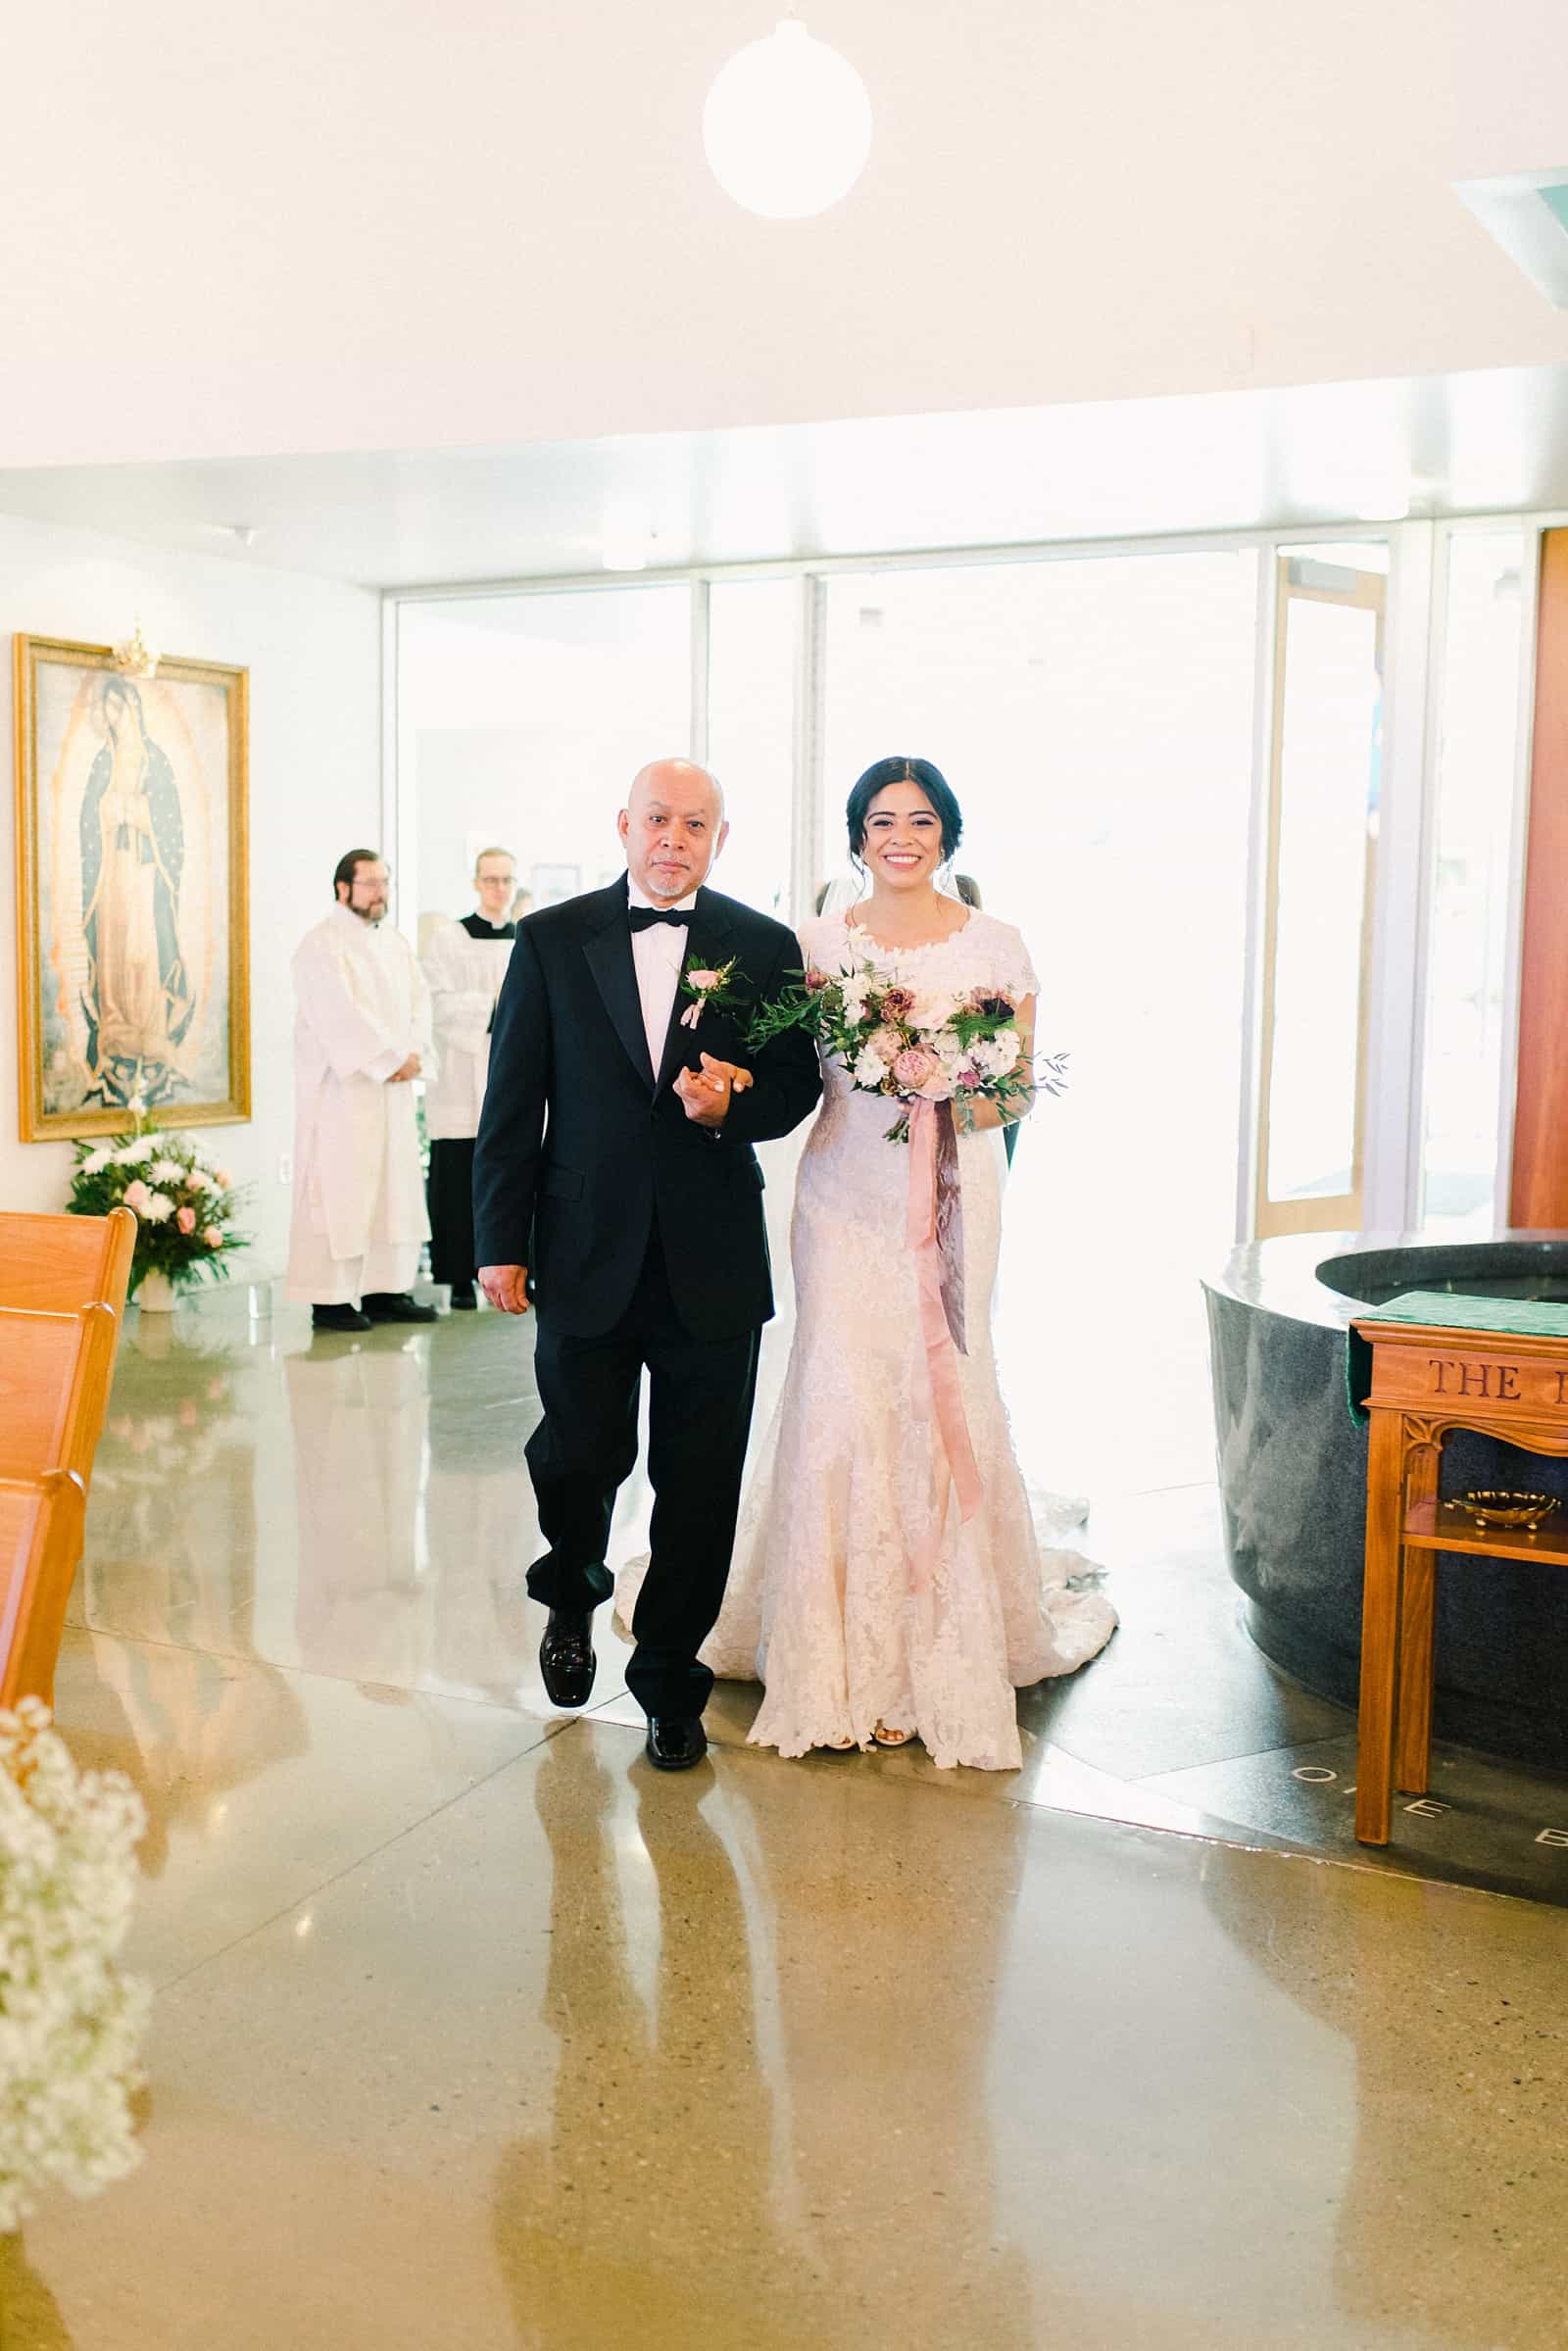 father of the bride walks her down the aisle in traditional Catholic ceremony